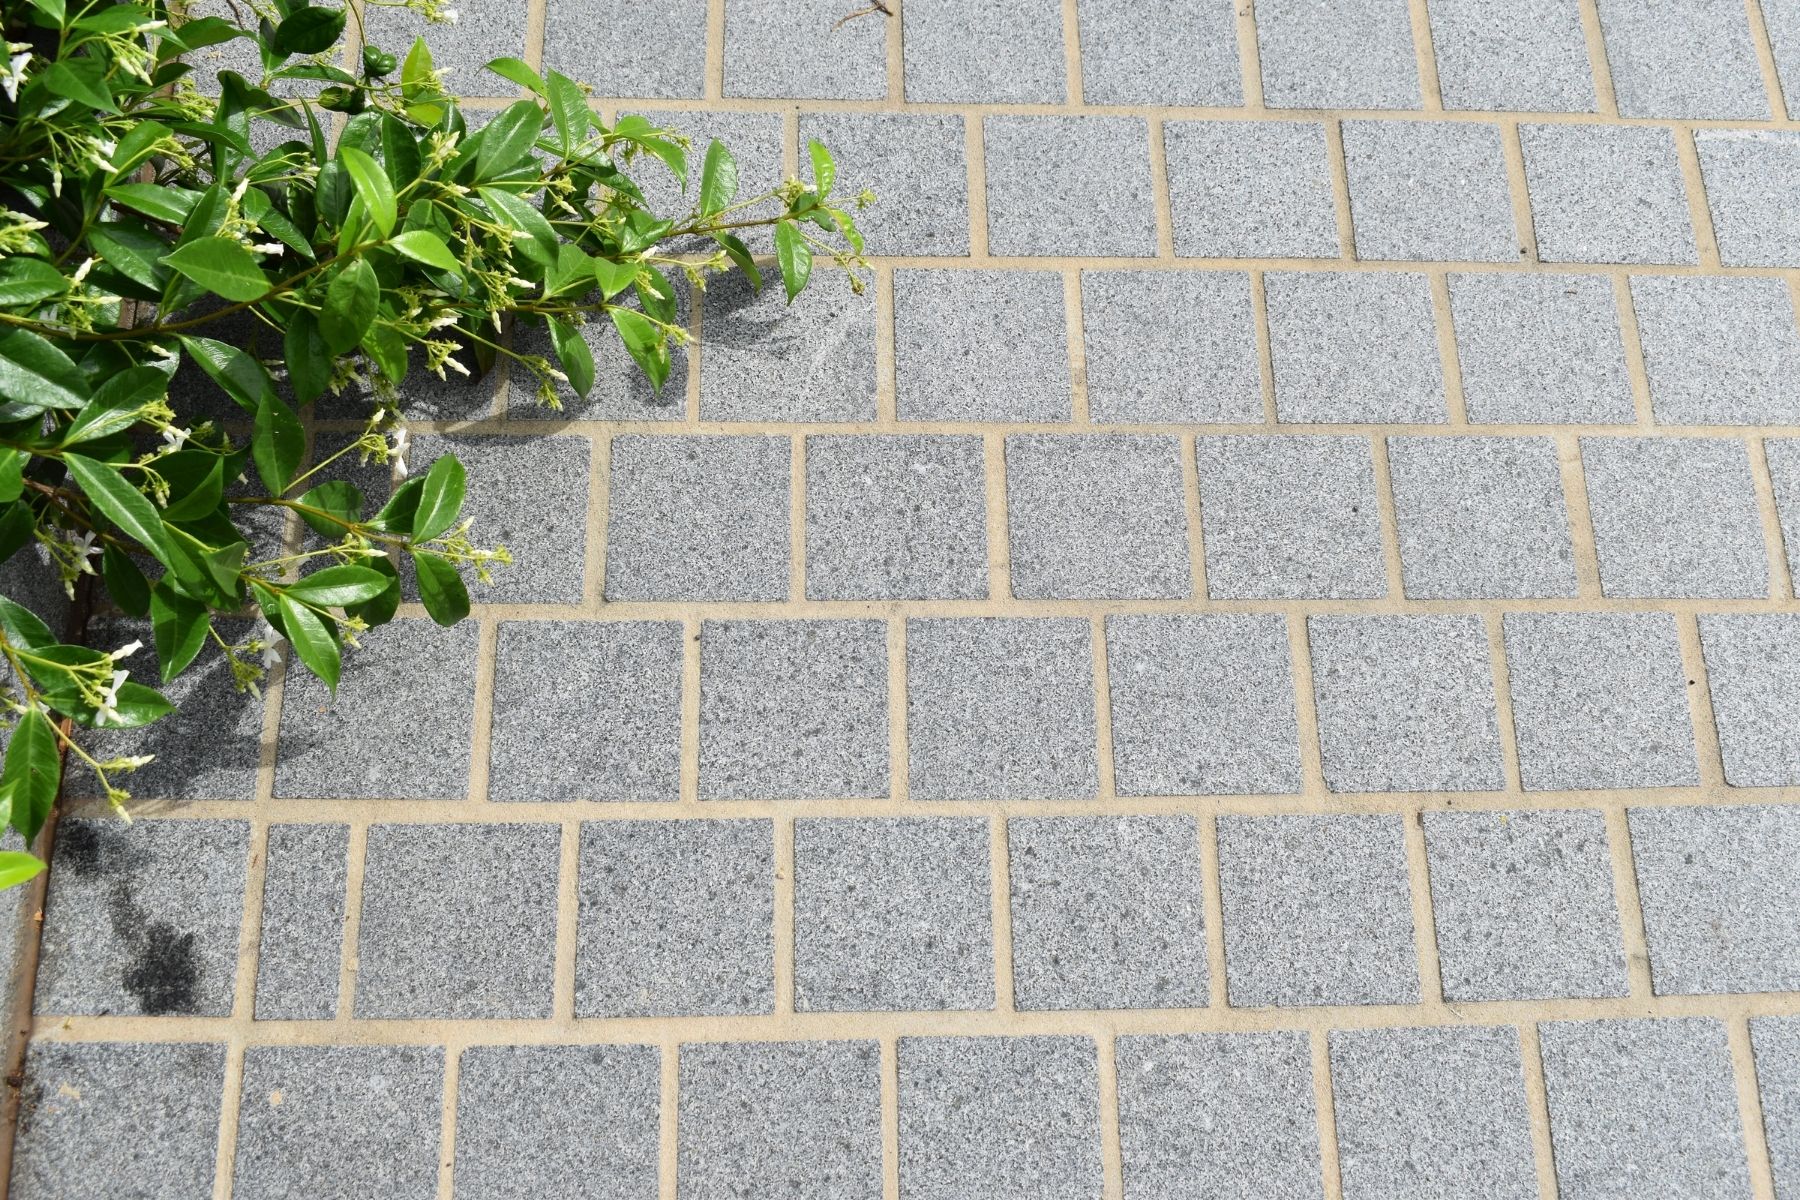 sesame grey cobbles used as driveway pavers